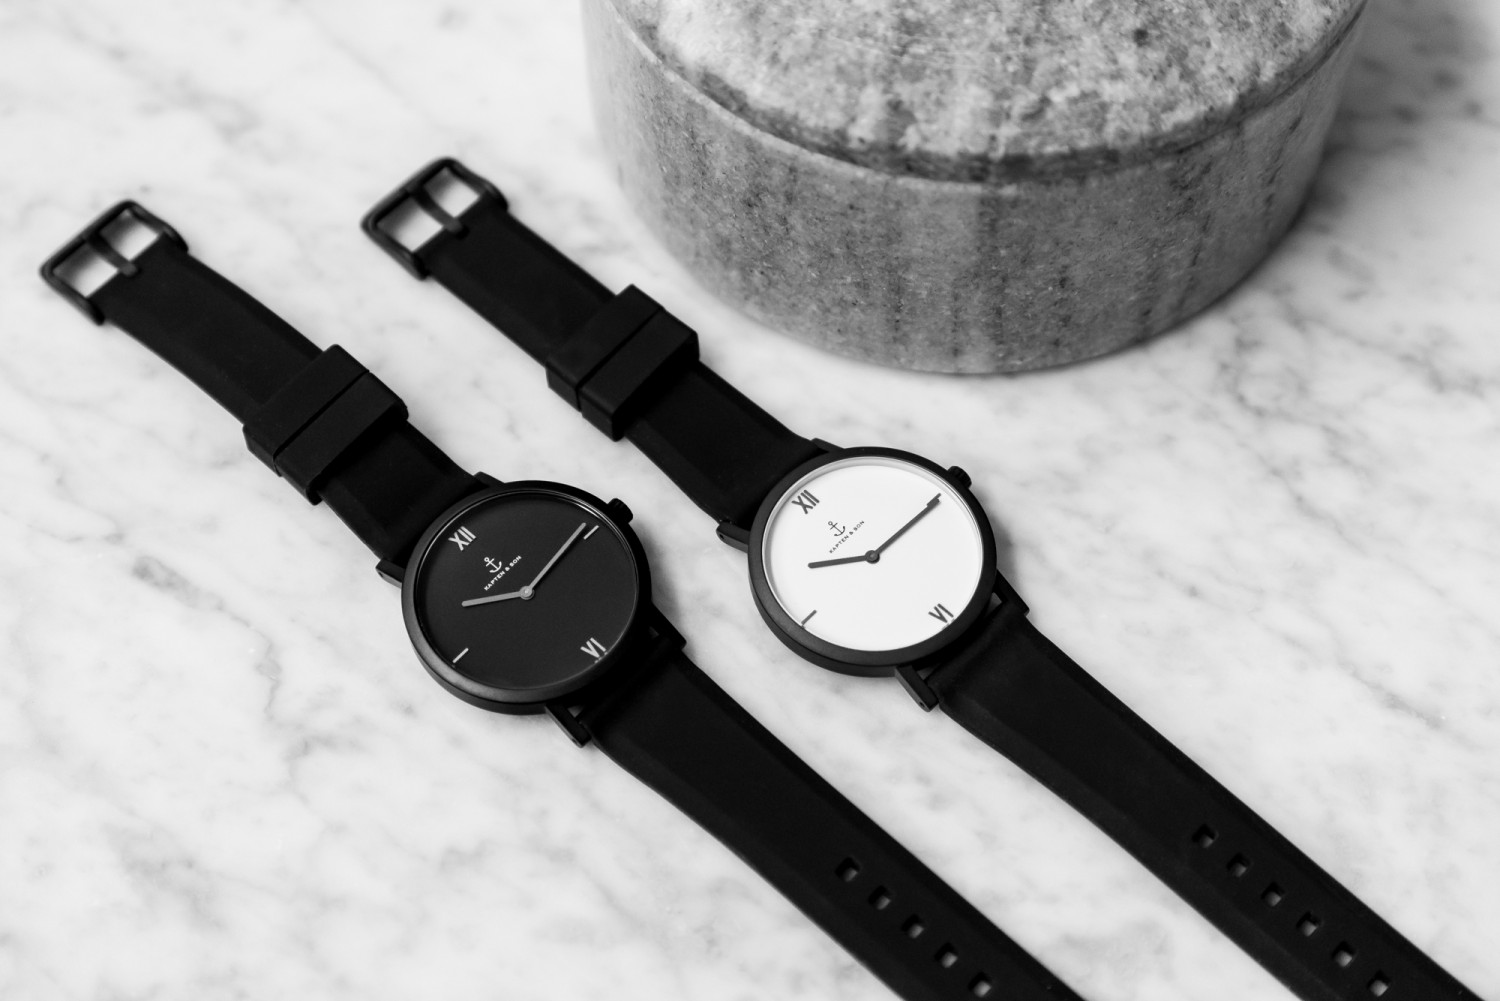 figtny.com | PURE The Minimalist Watch by Kapten & Son 